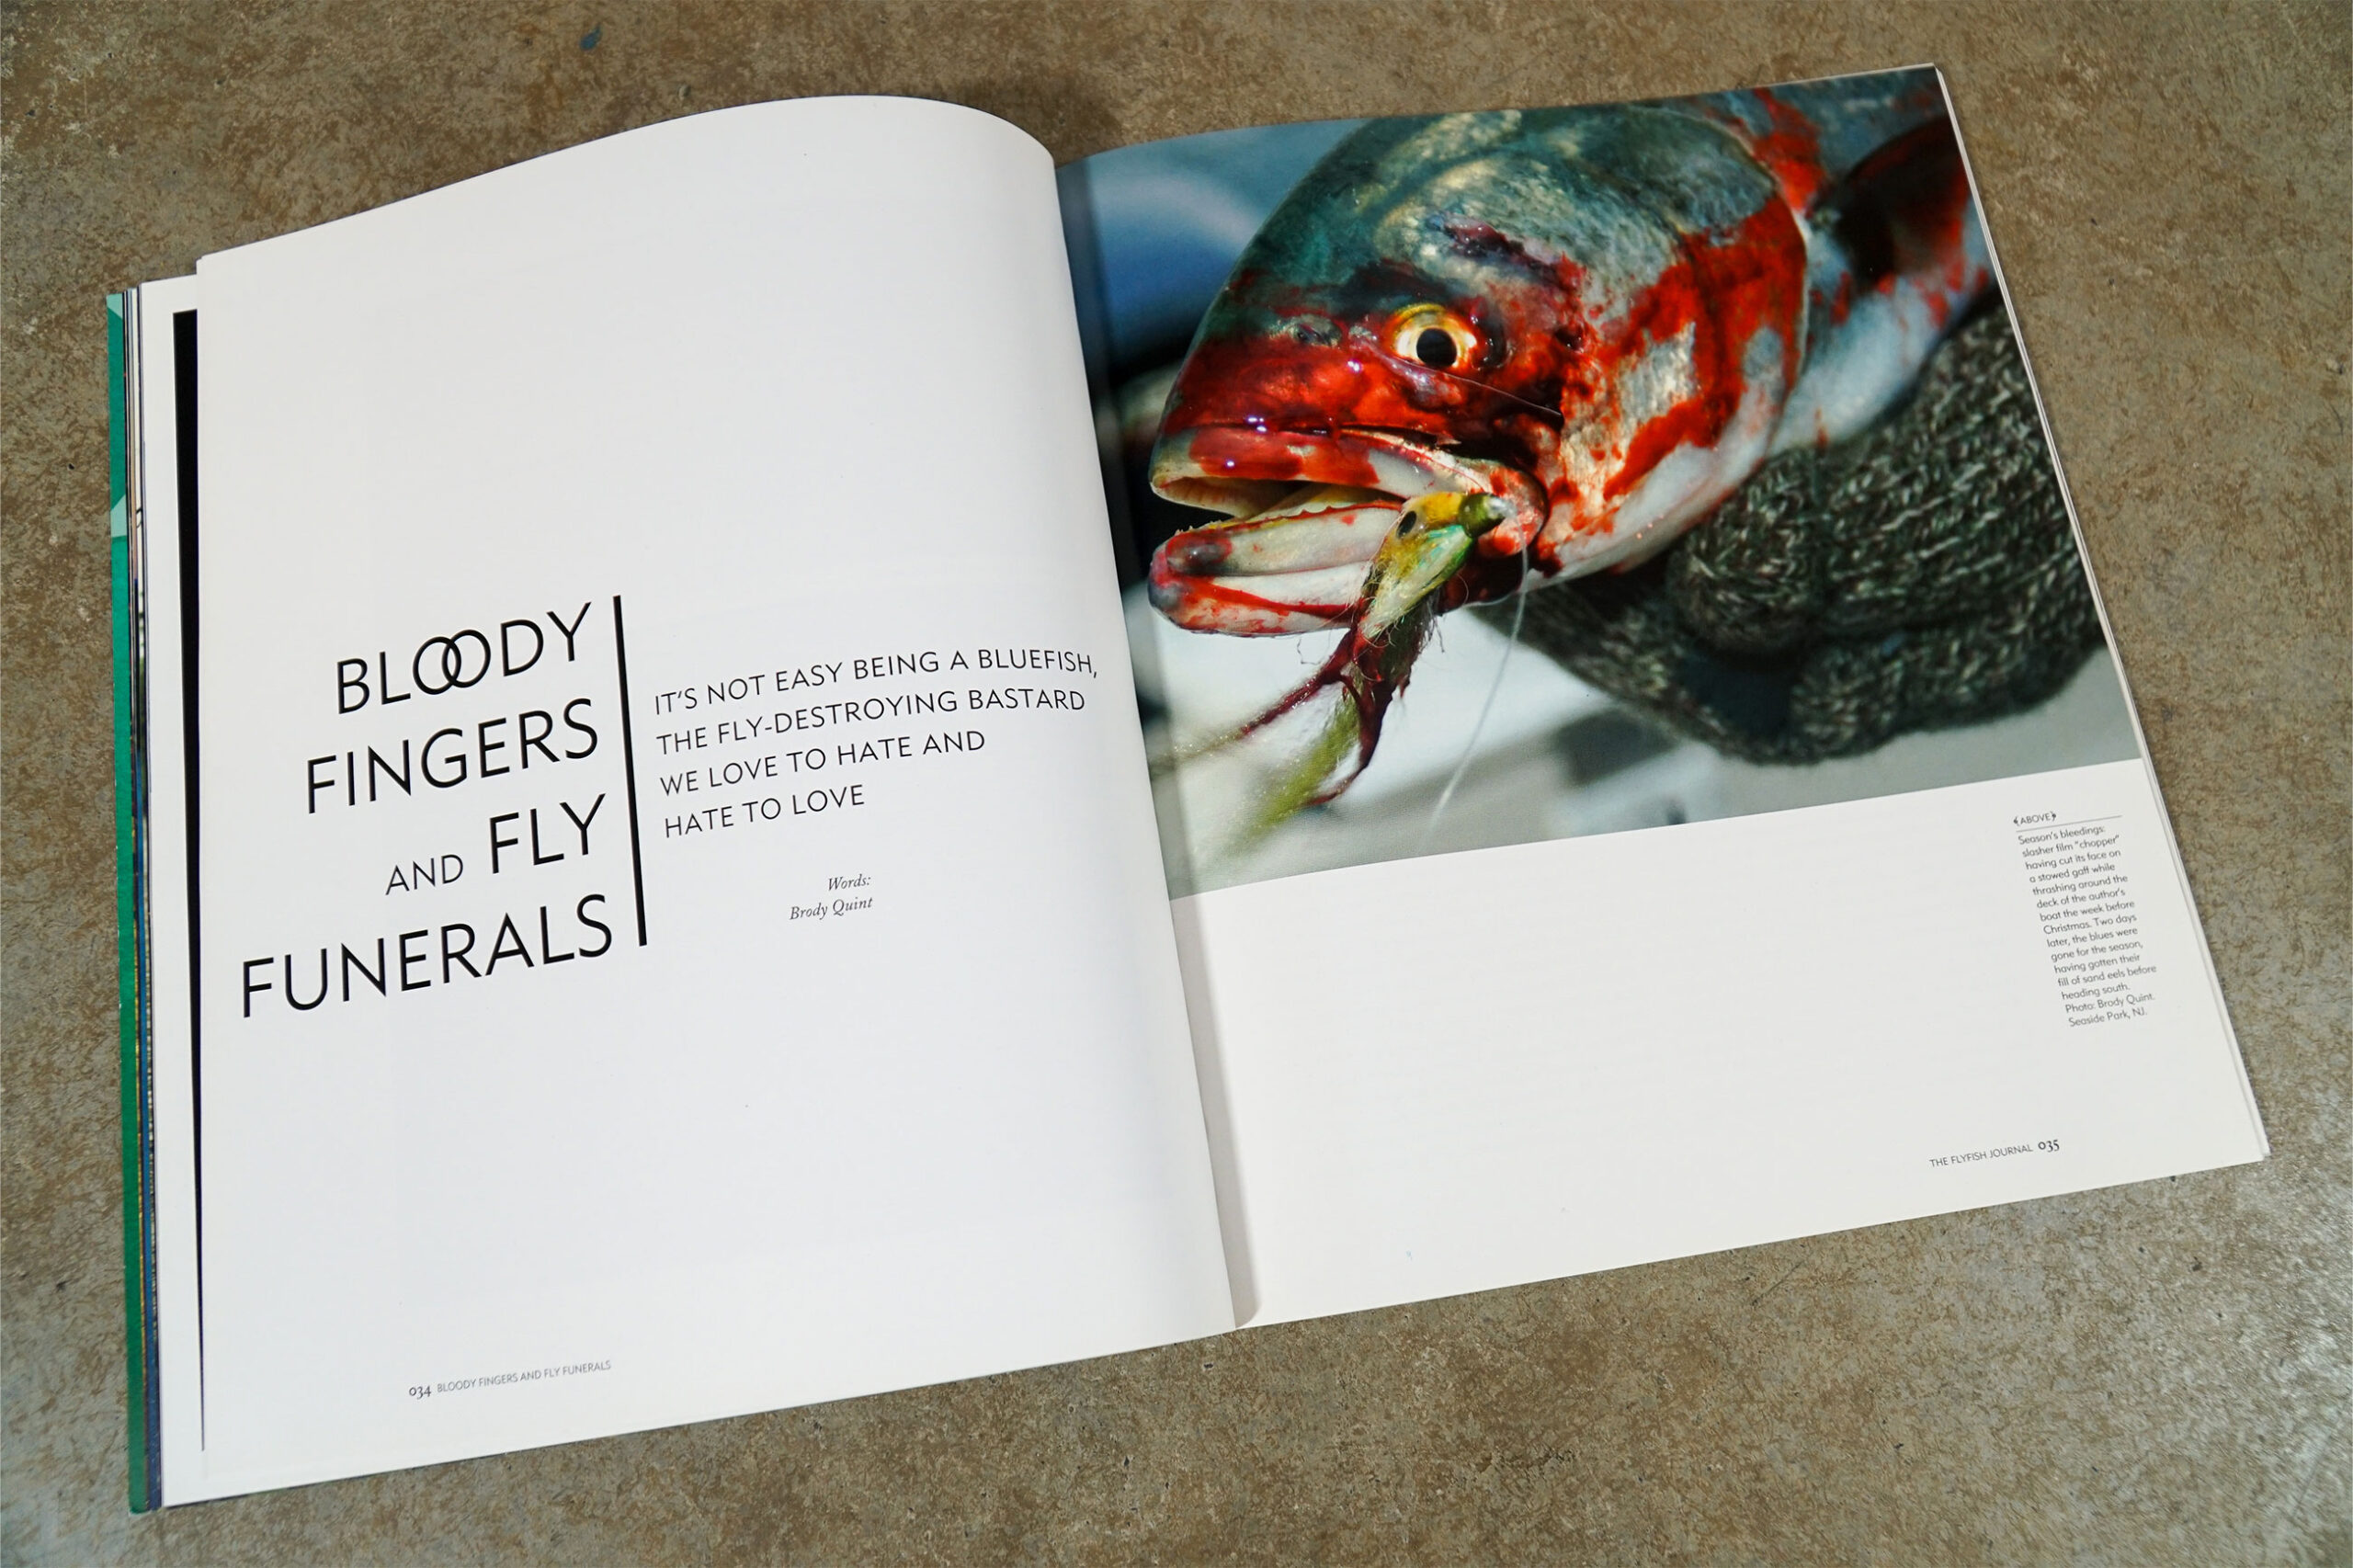 The Flyfish Journal Volume 1 Issue 1 Feature Bloody Fingers and Fly Funerals